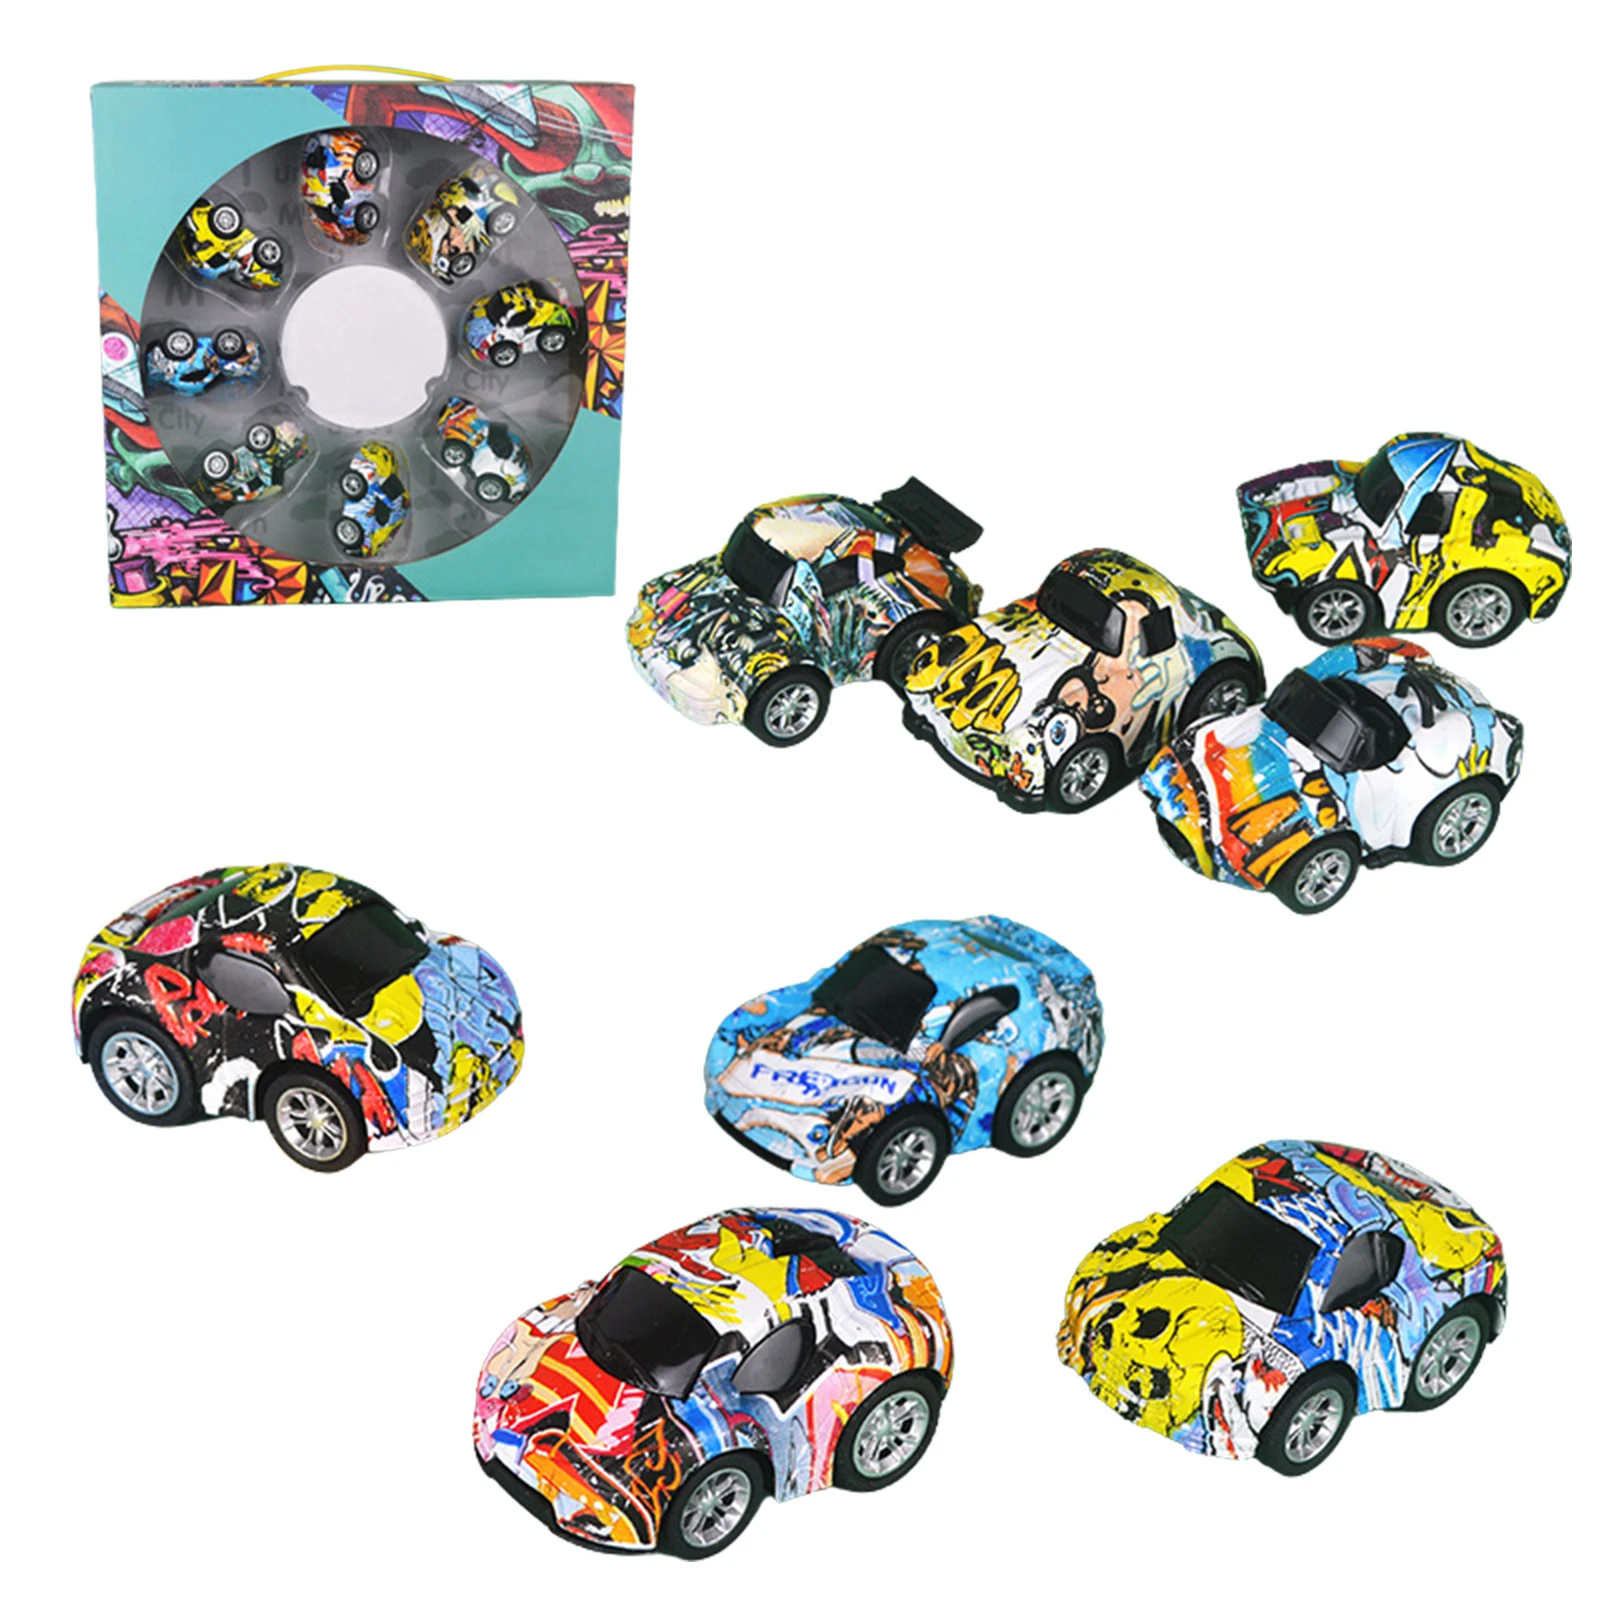 

Pull Back Toy Cars For Toddlers Kids 8 Pack Mini Colorful Graffiti Patterns Alloy Vehicles Push And Go Friction Powered Toy Car